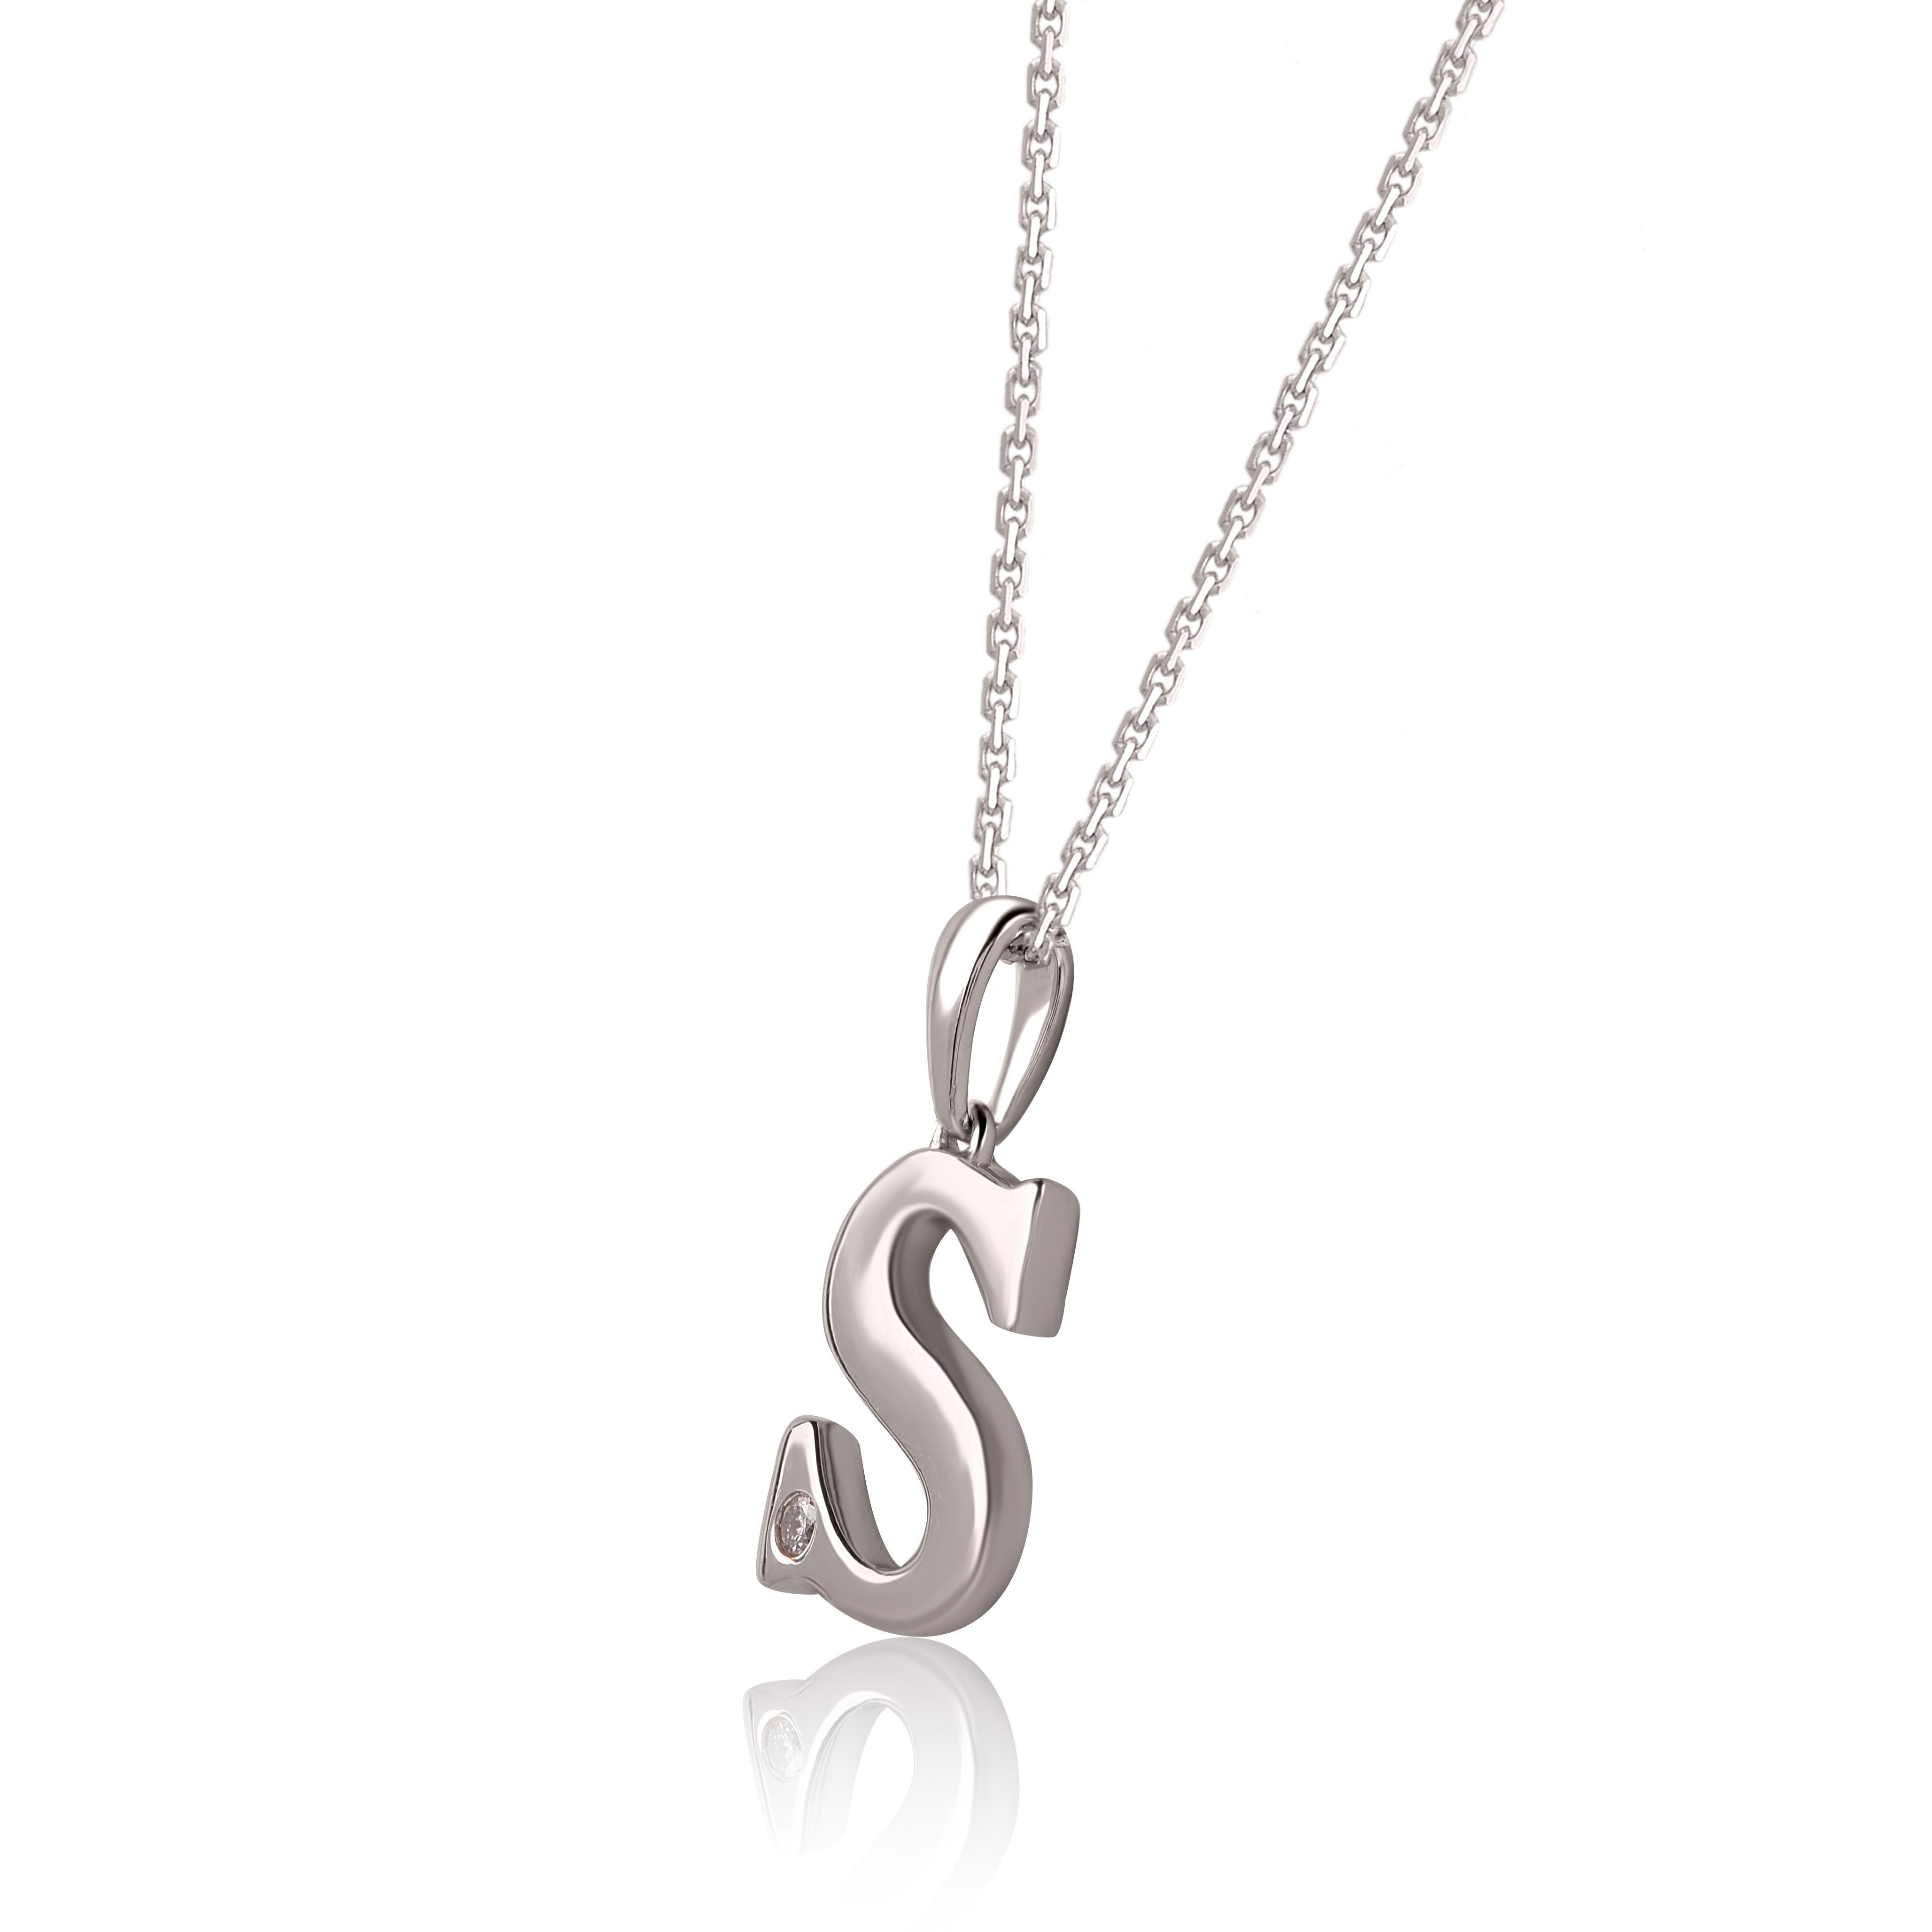 Diamond studded letter pendant is a piece of jewelry that is a favorite with everyone. Made by skillful craftsmen in 14KT white gold and Studded with 1 round shaped natural brilliant cut white diamonds in flush setting and shine in H-I Color I2